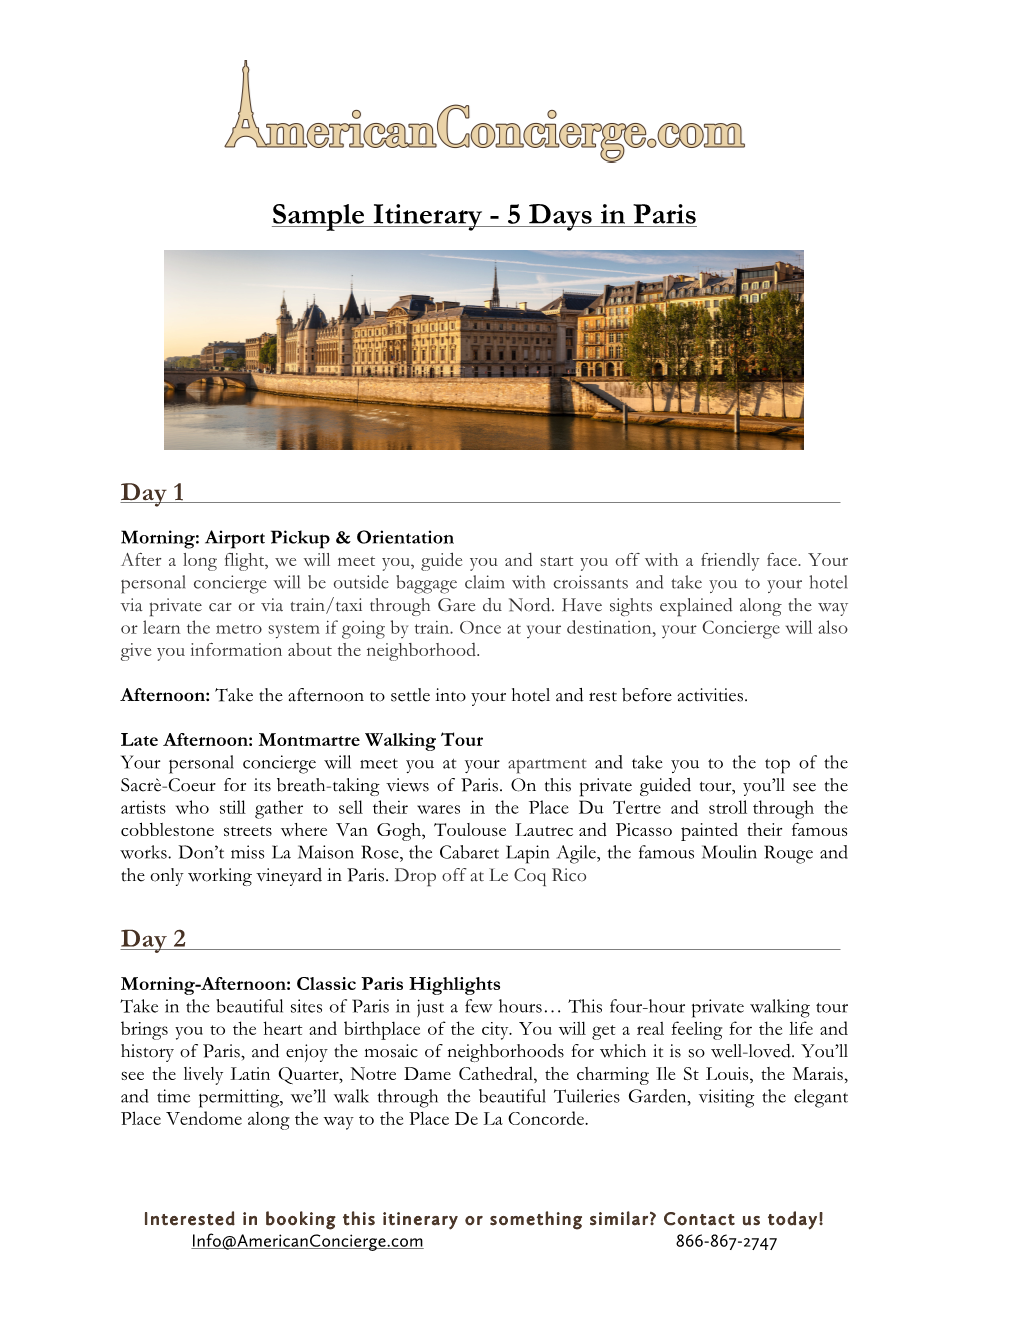 Sample Itinerary - 5 Days in Paris